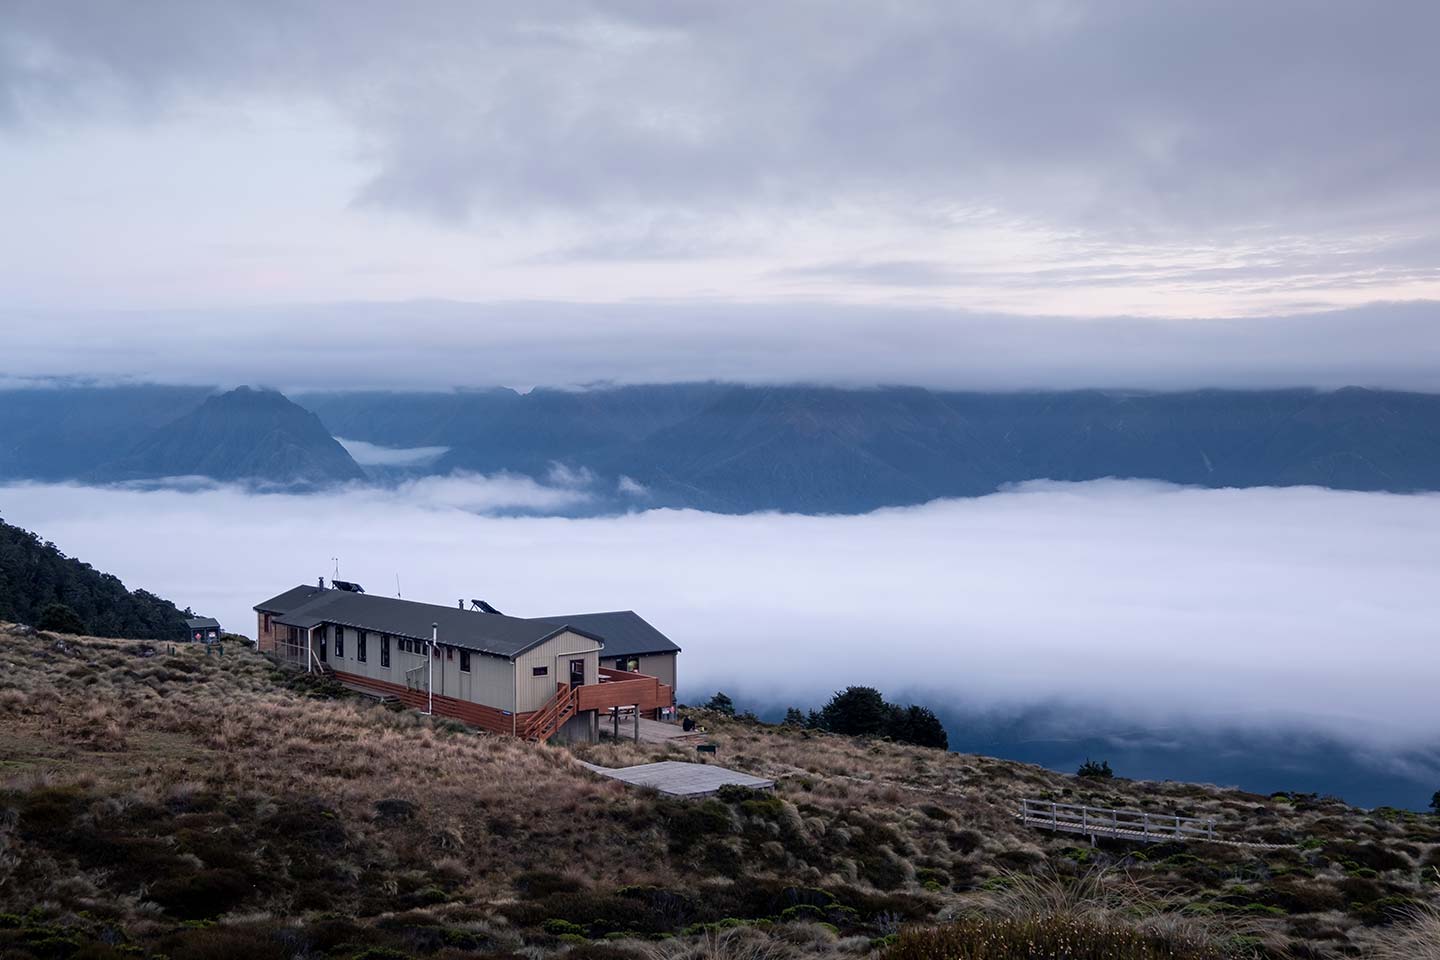 Luxmore hut situated above the clouds in the early morning light. Luxmore is one of three huts found on the Kepler Track.